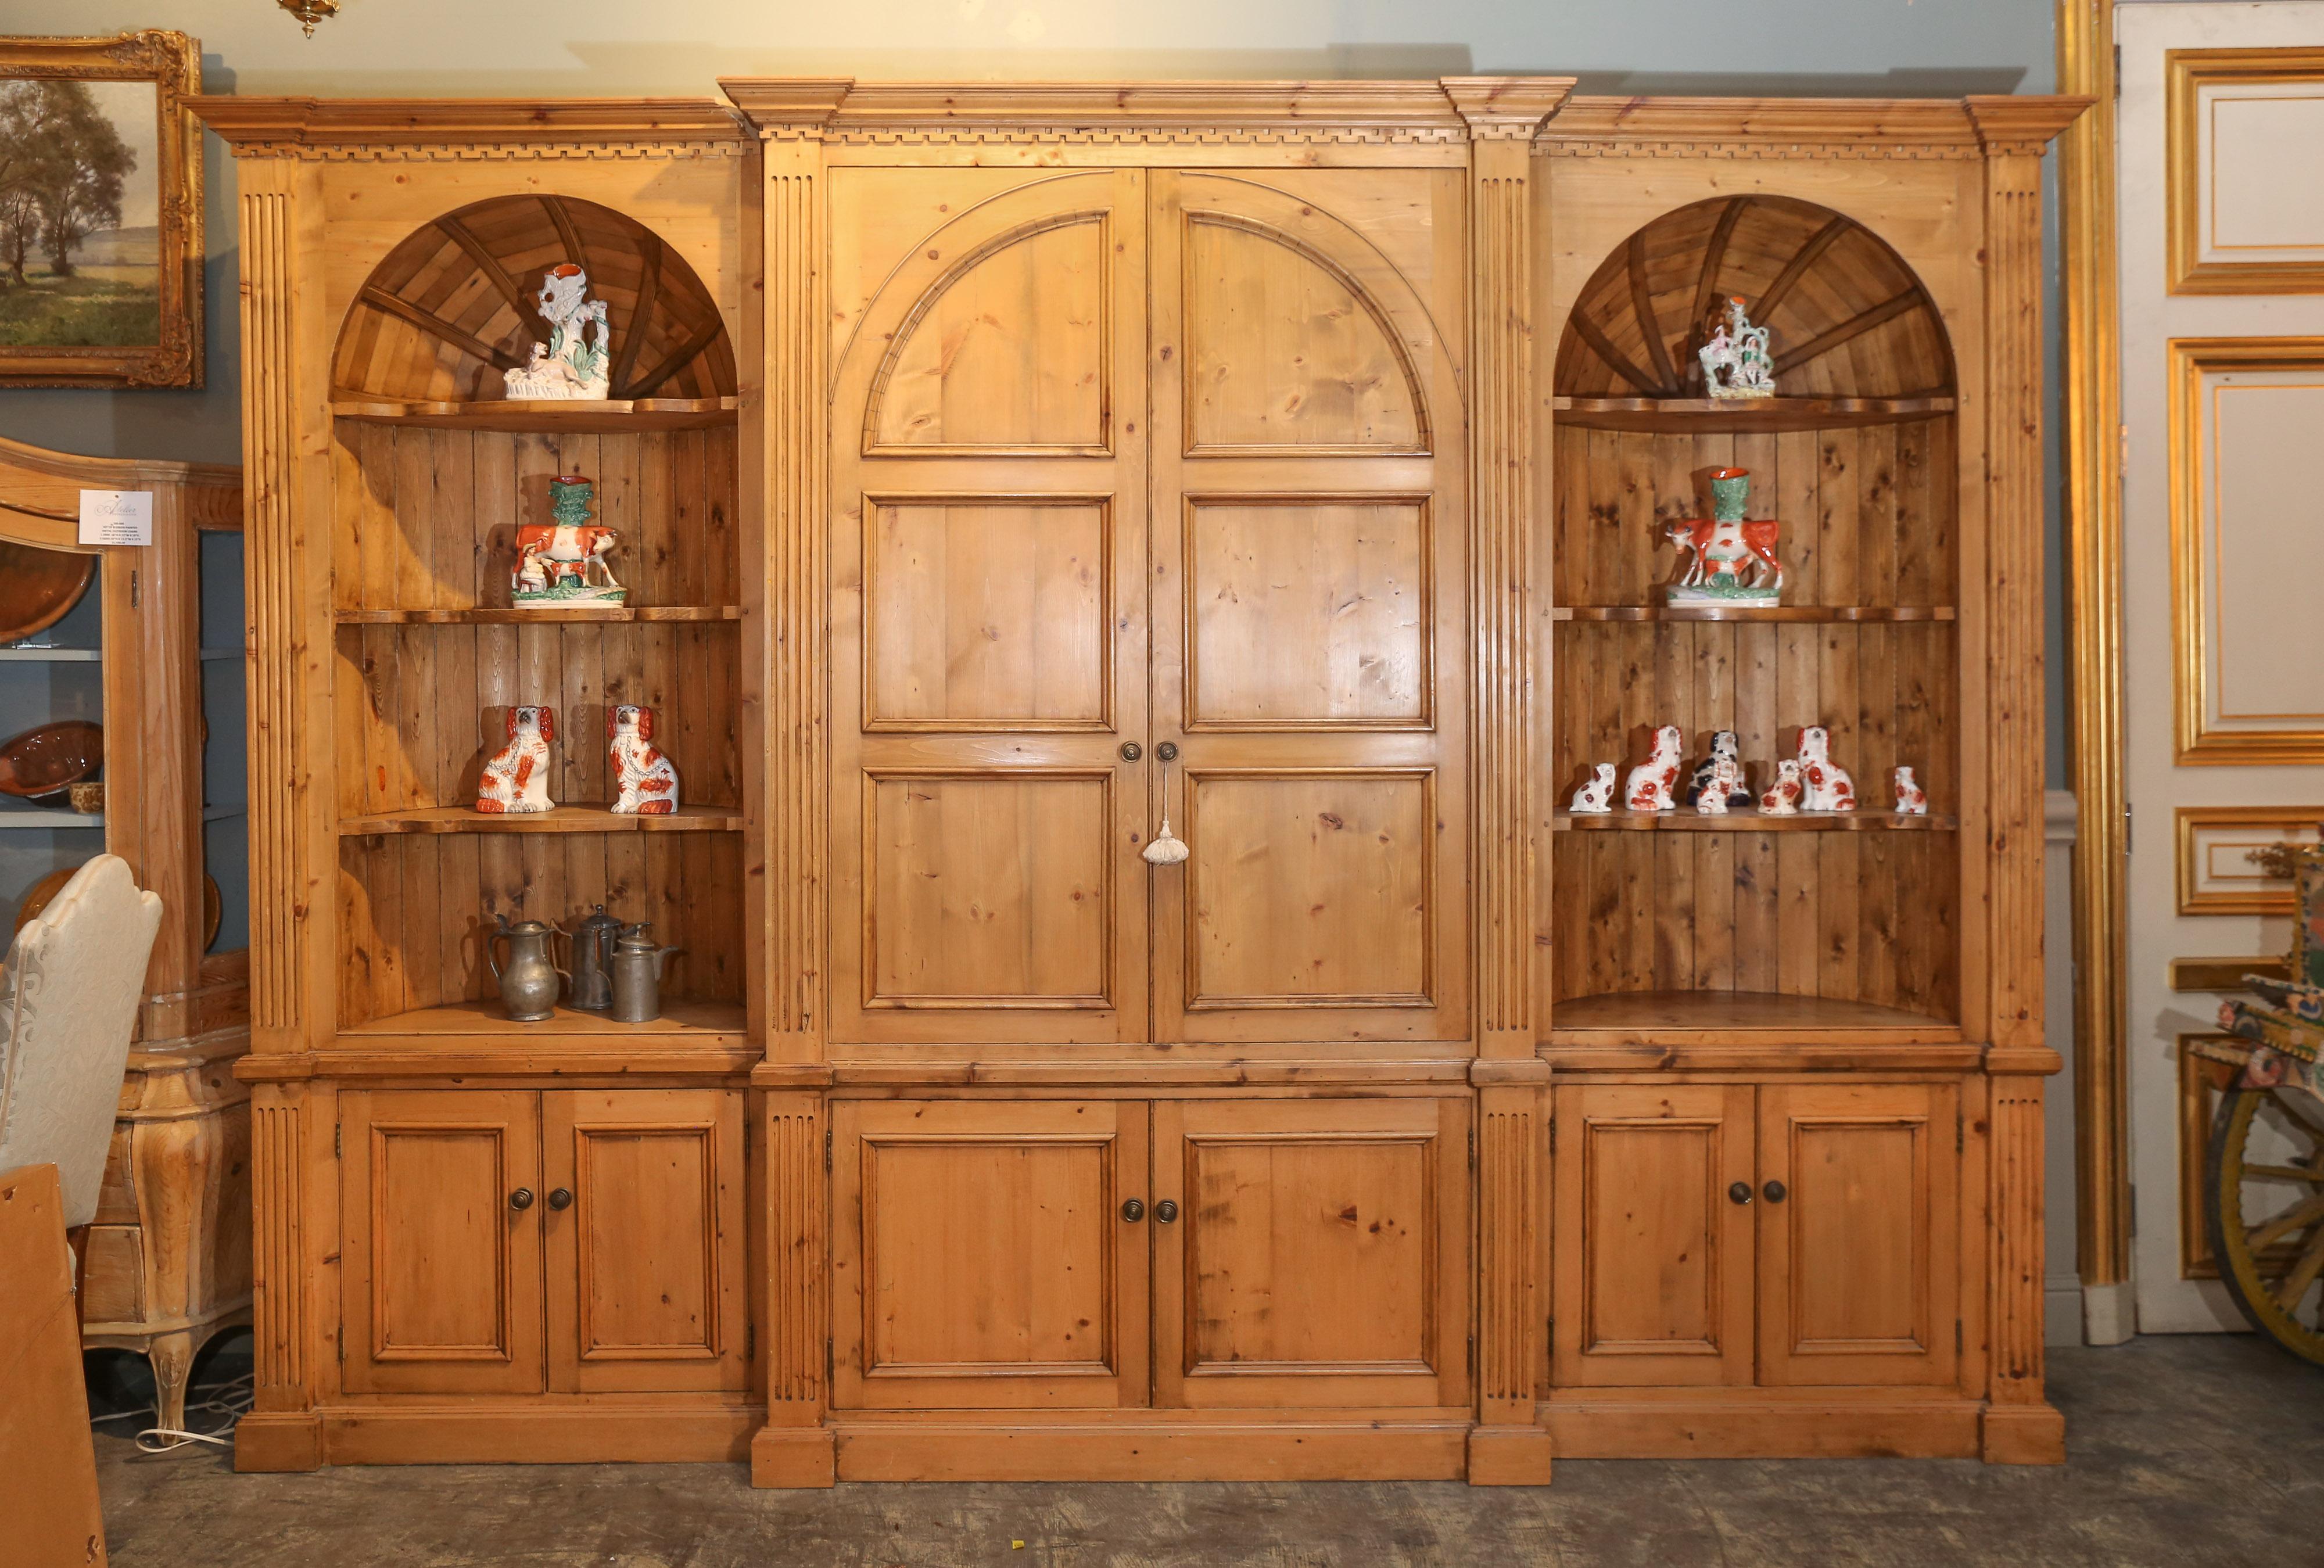 Vintage pine cabinet has closed arched doors for storage and shaped shelving for
display on either side.

